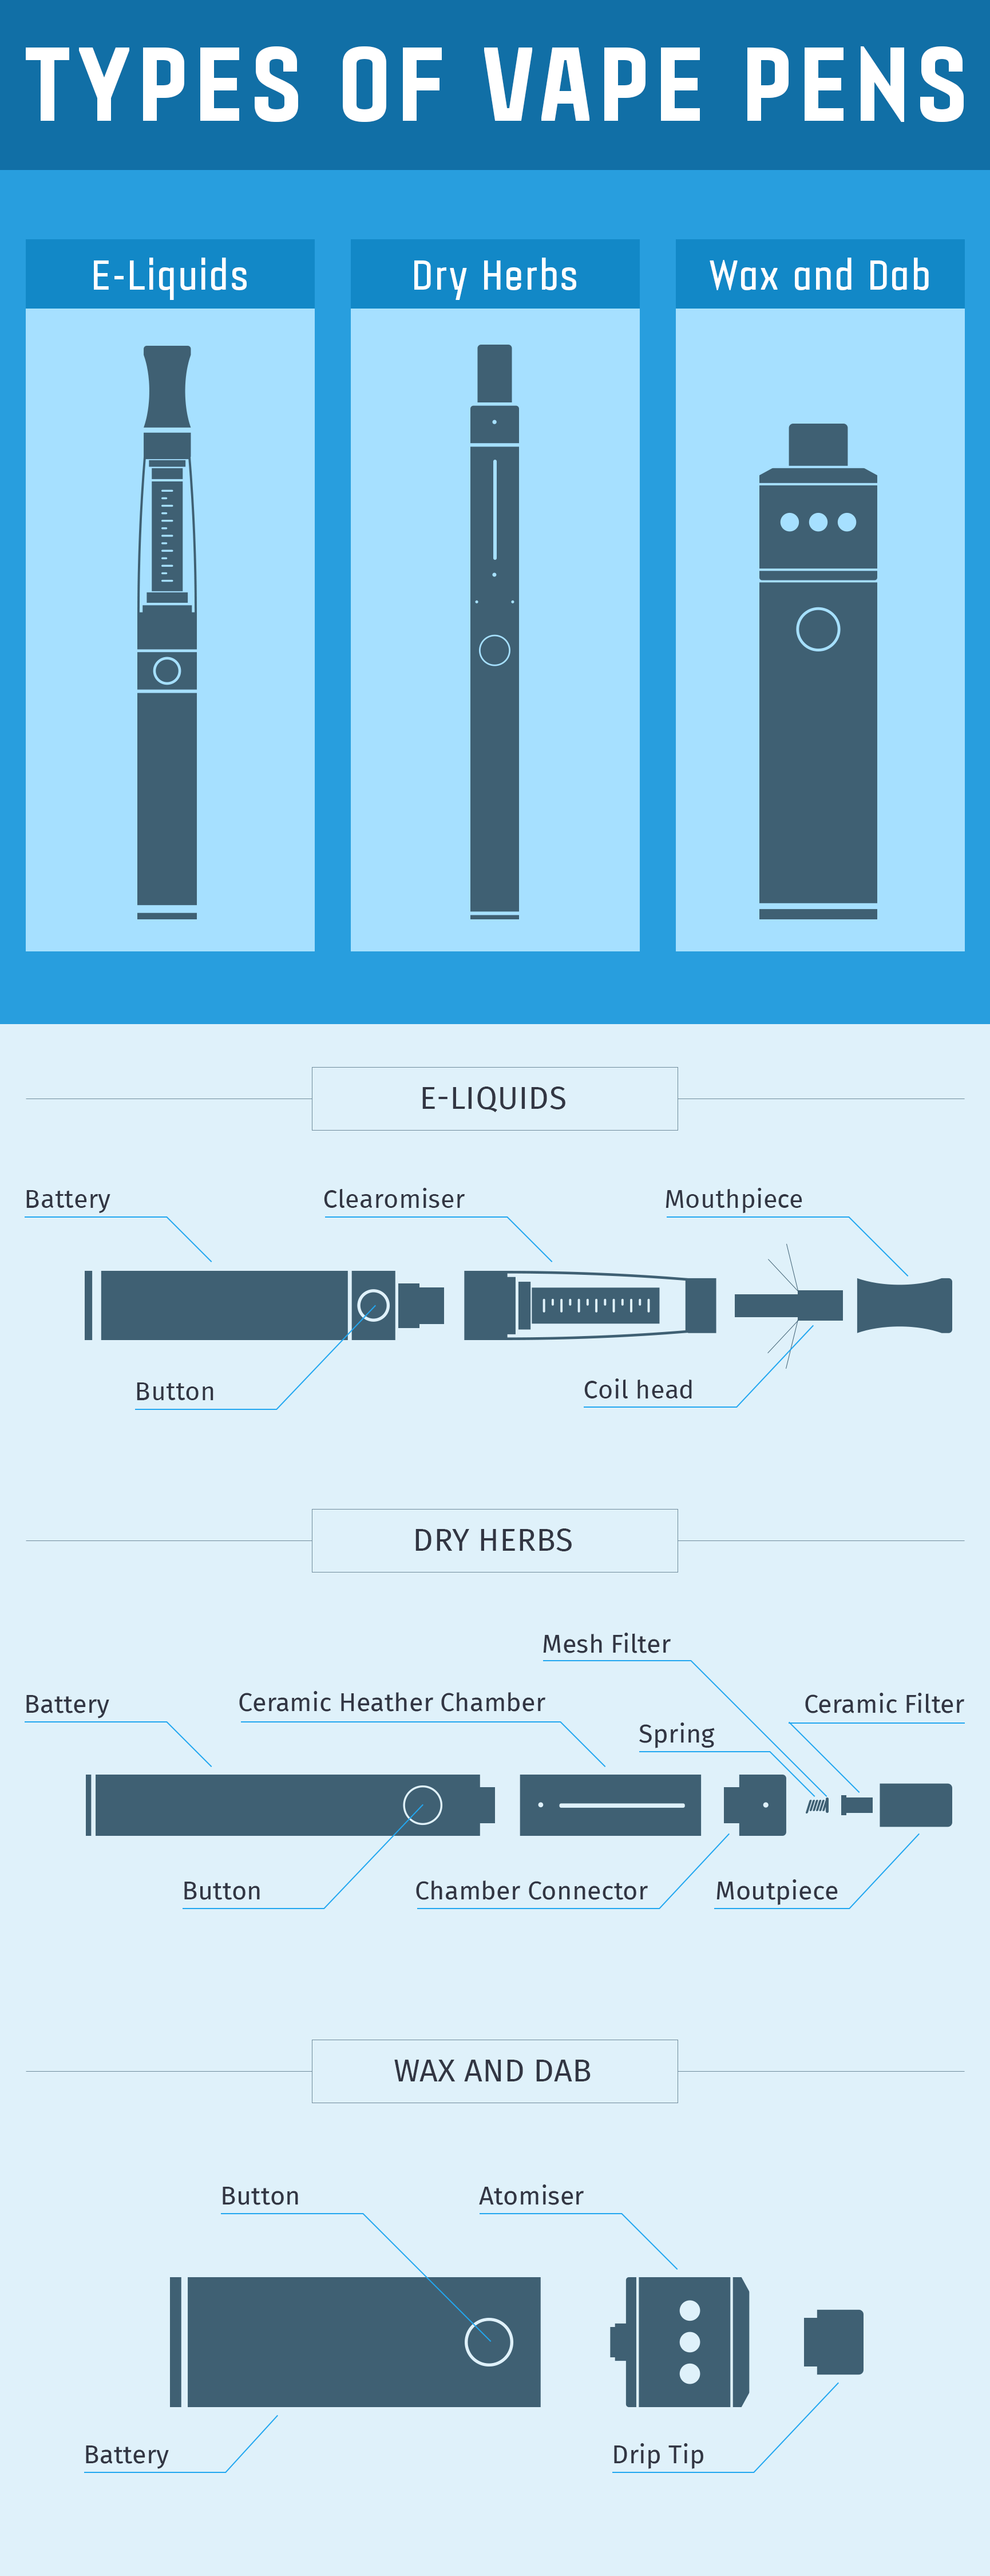 types of vape pens infographic by Vaping Daily